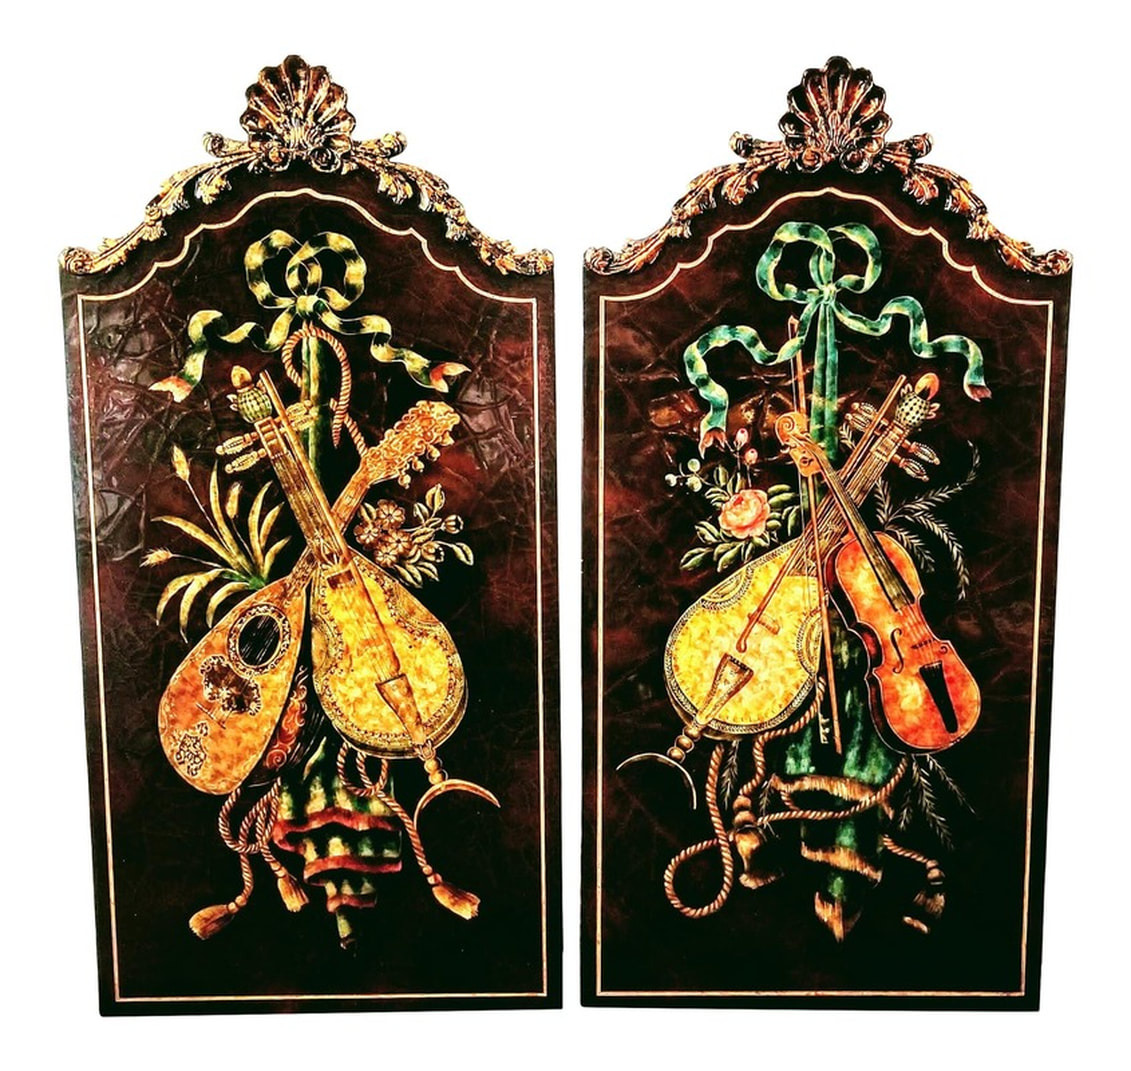 Pair of Maitland-Smith wall panels are in the Ottoman Baroque, or Rococo style which was brought to Istanbul from Europe by Sultan Ahmed III at the beginning of the 18th century.  The fronts feature textured hand painted themes of green ribbons; pink roses and buds; flowers and foliage; gold cords and tassels; folded Turkey work fabrics; and representational instruments of Turkish and European classical music - tambur, violin, and spike fiddles.  The bonnet top is crowned with burnished gold Rocaille decoration including a clamshell and acanthus leaves.  Panels are wired and ready for hanging on your walls.  Measurements : 30